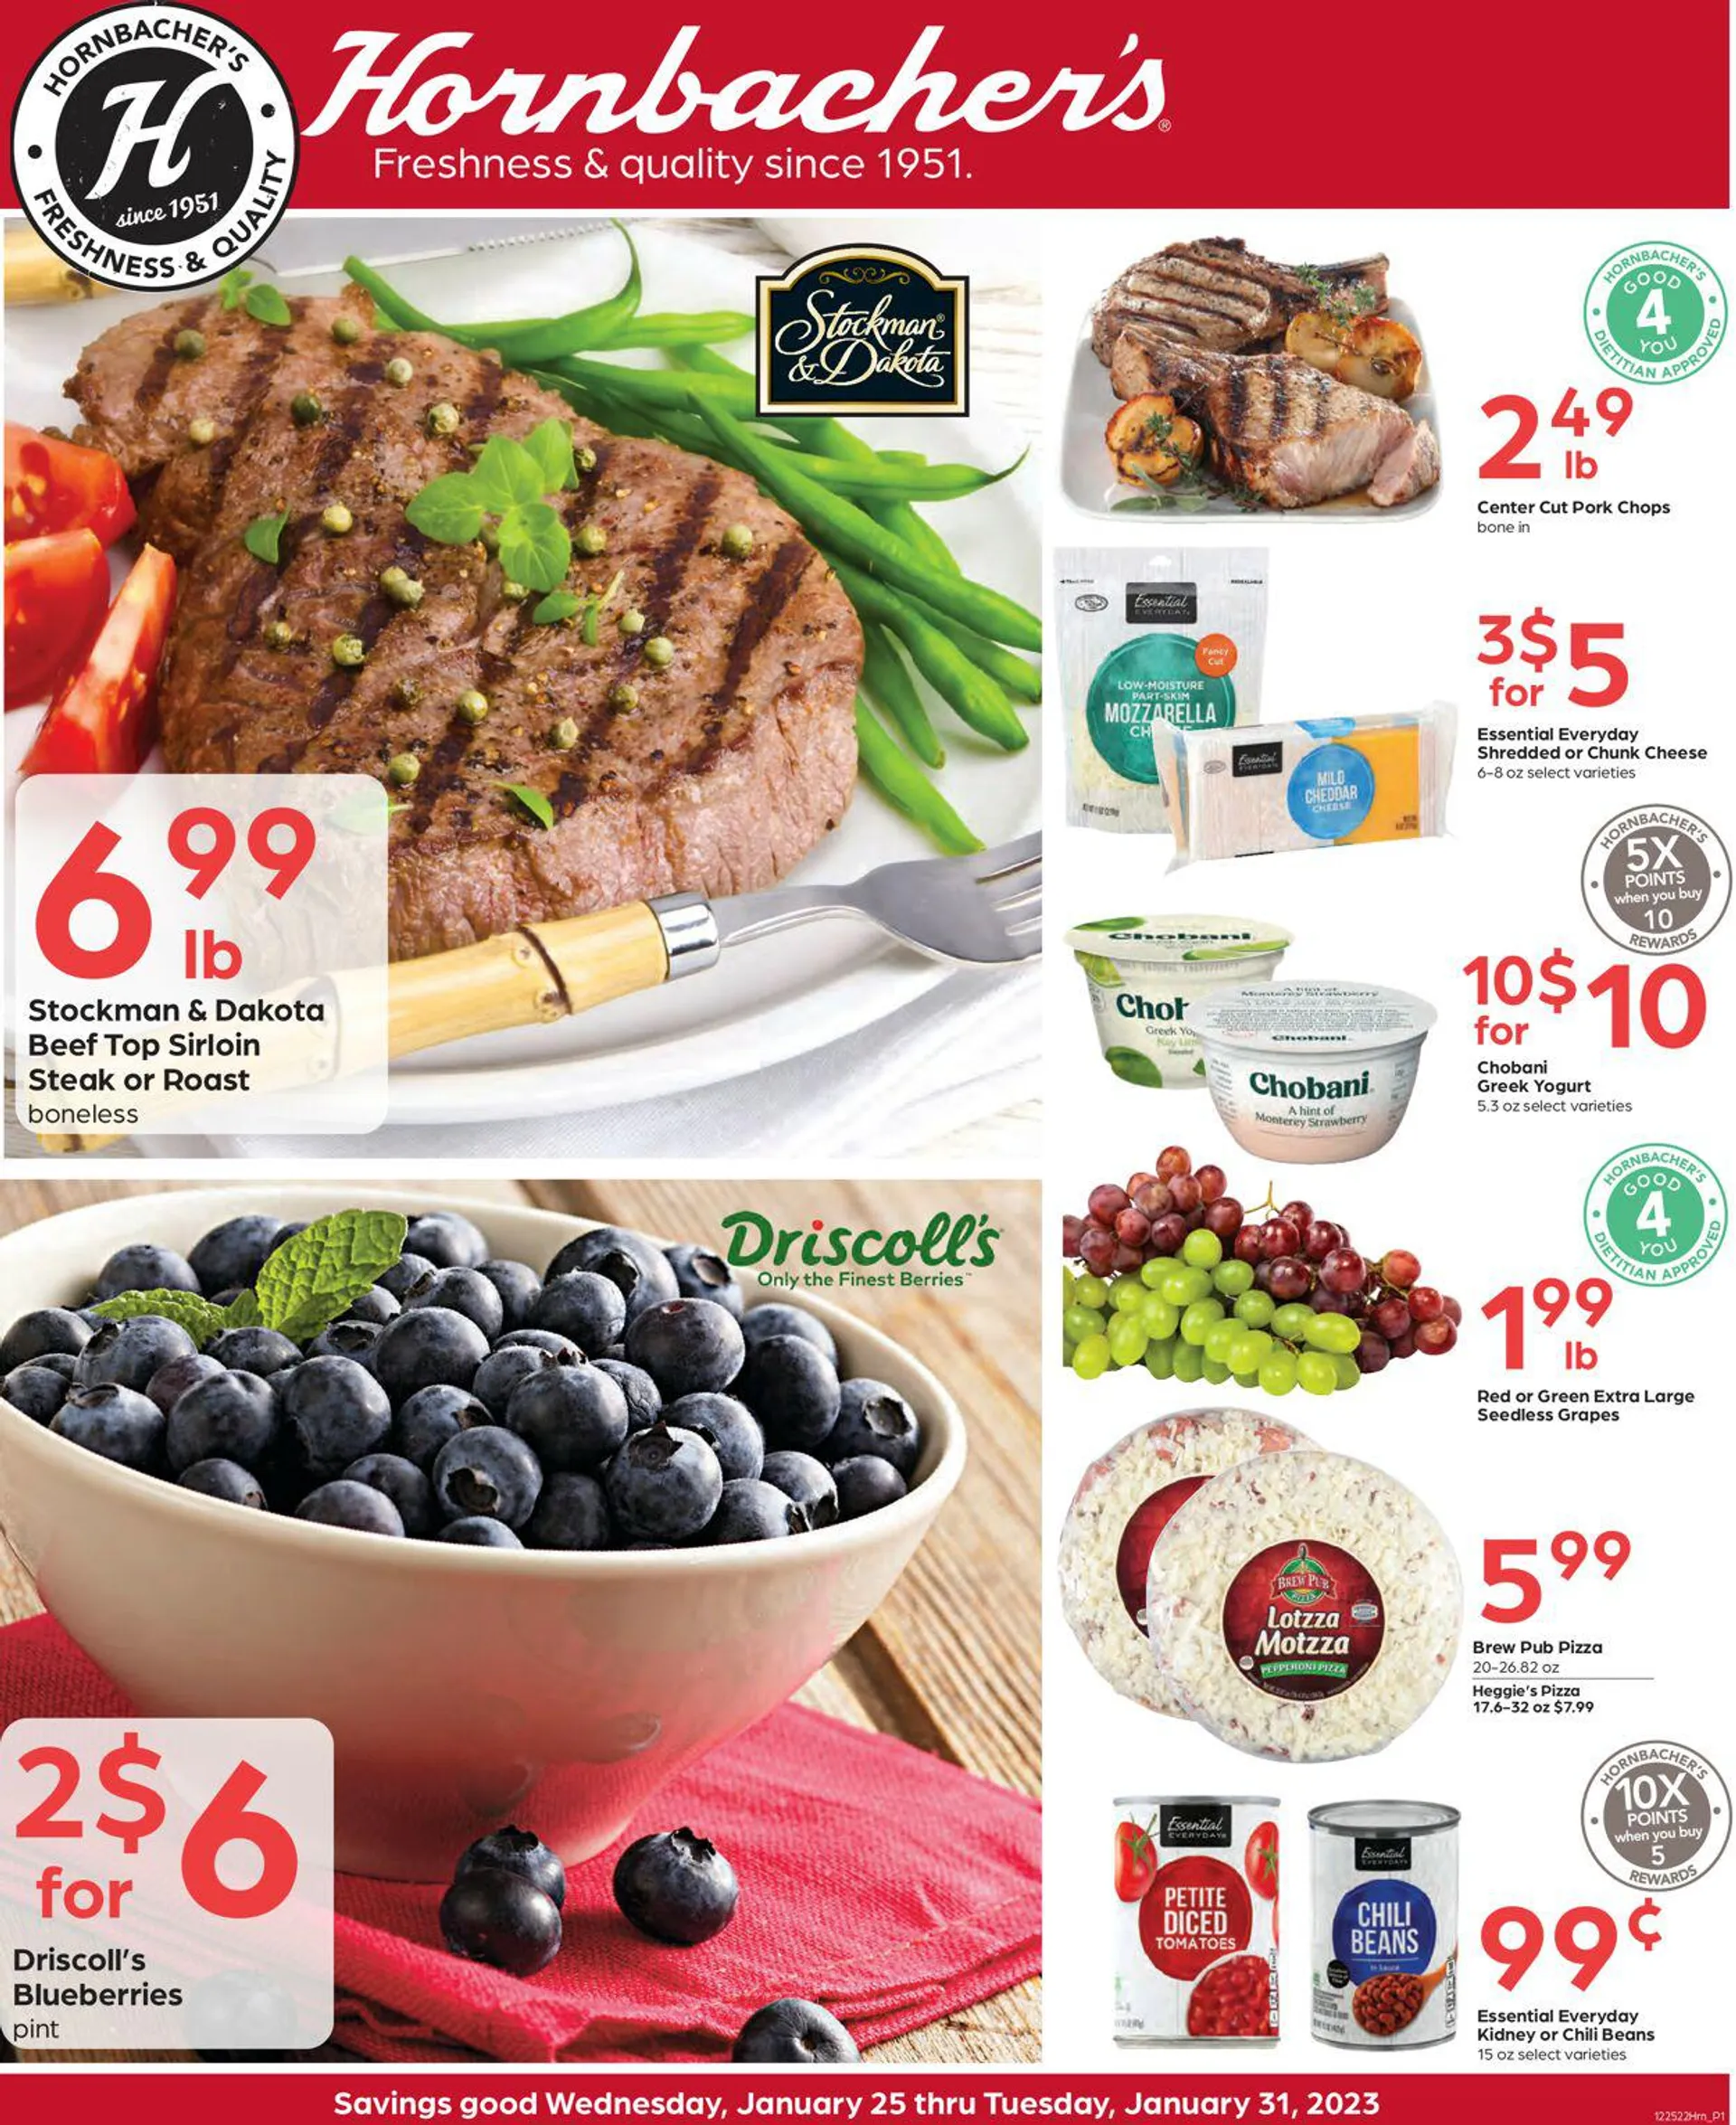 Hornbachers Current weekly ad - 1